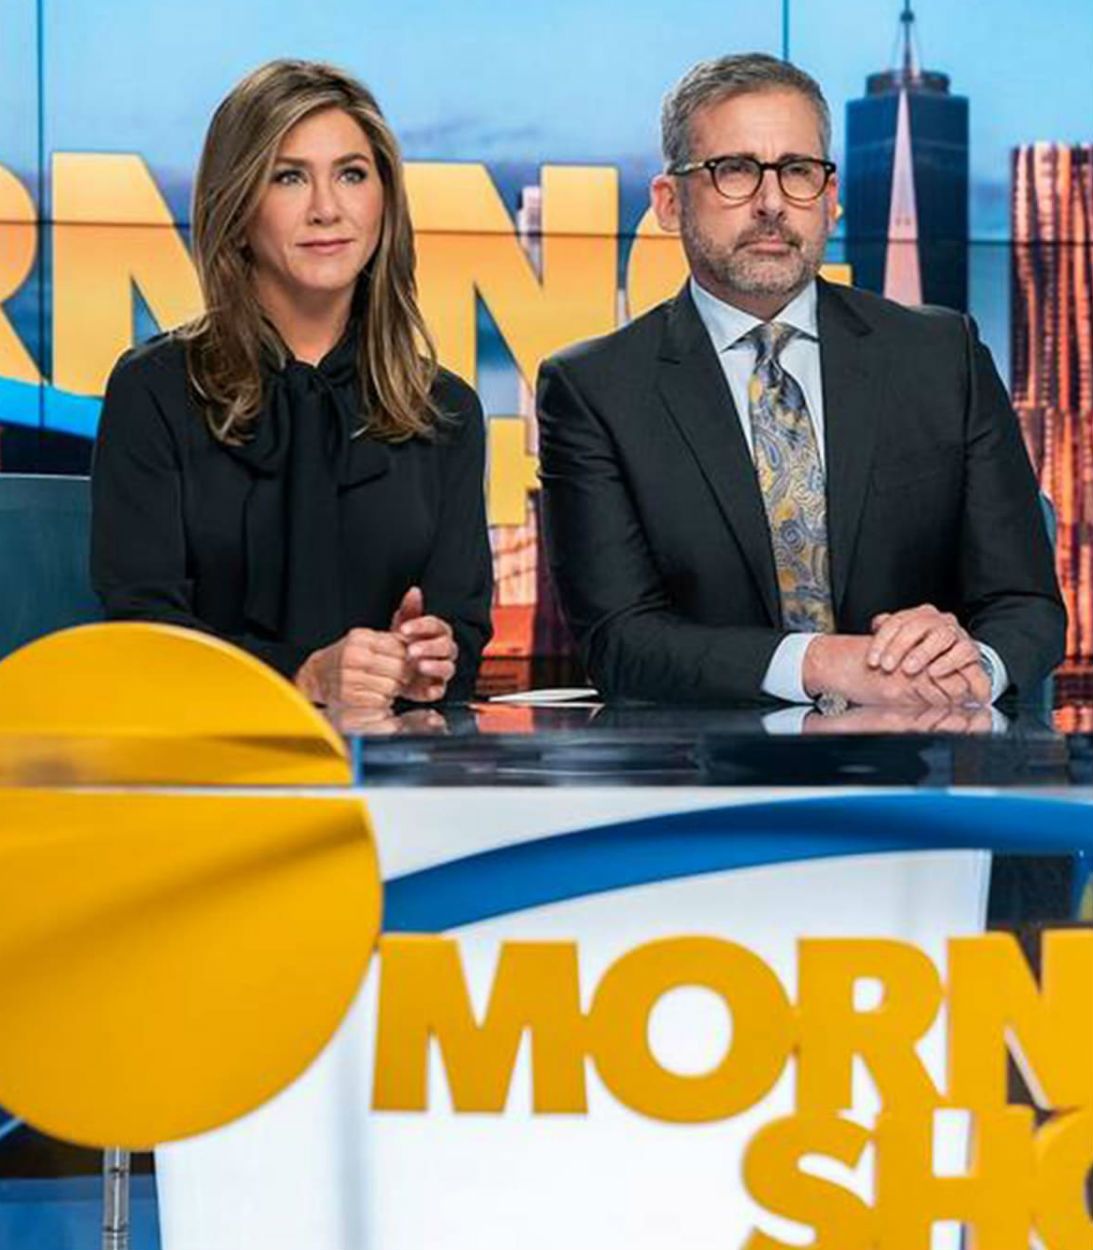 Steve Carell and Jennifer Aniston in The Morning Show Vertical